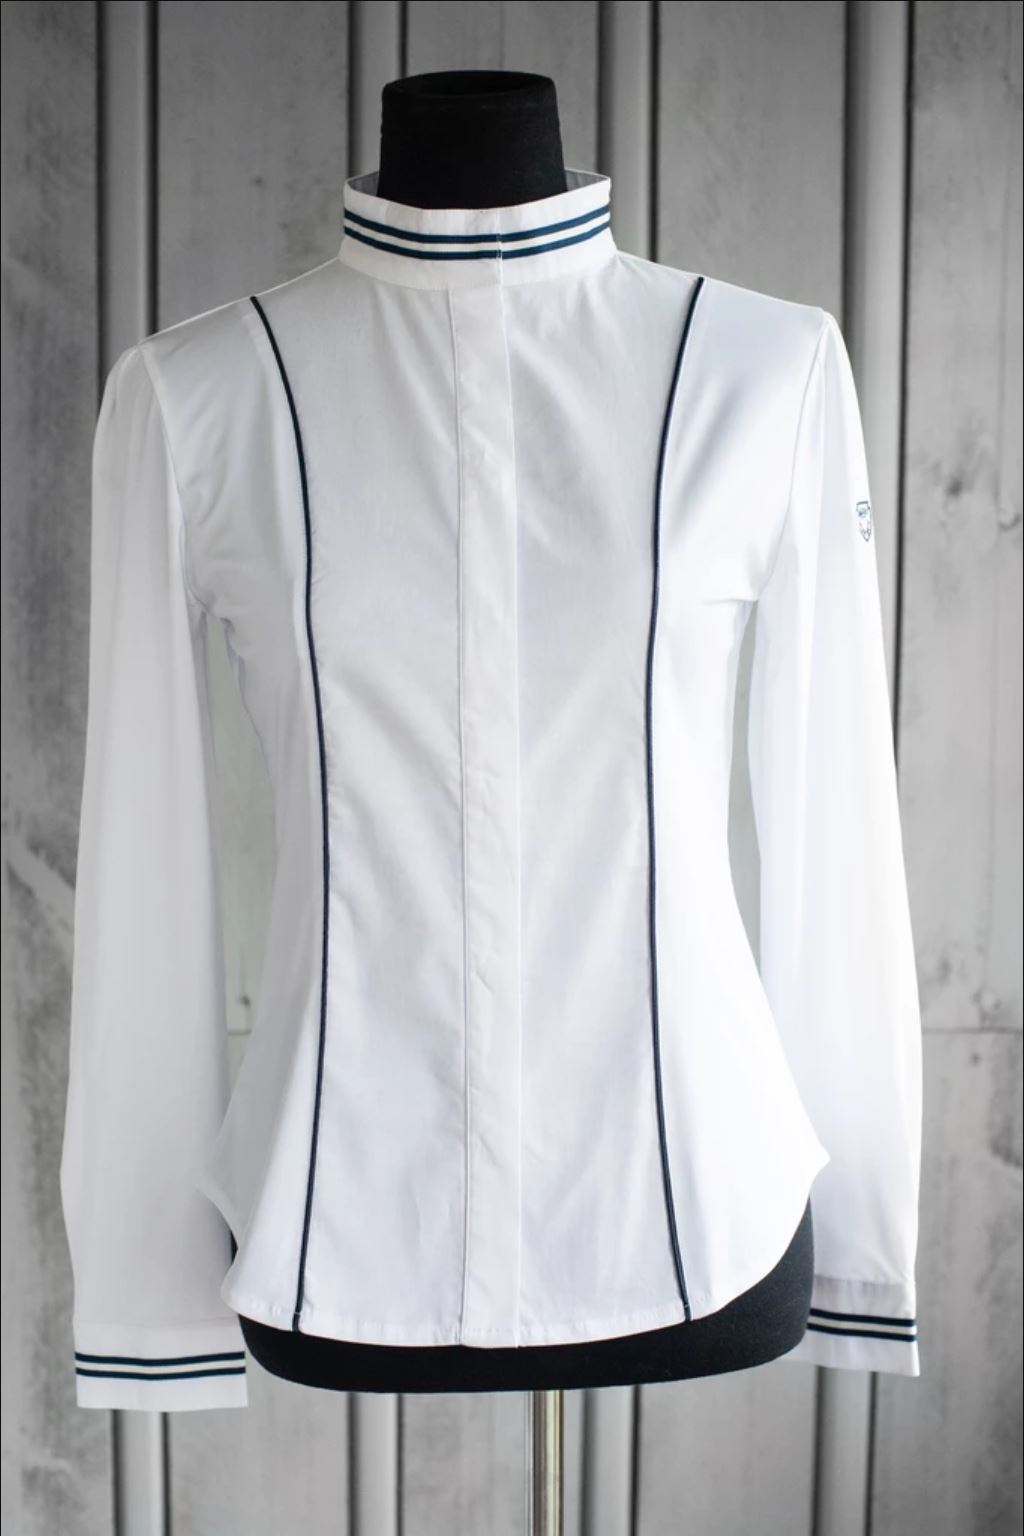 DHRW Classic Competition Shirt - White